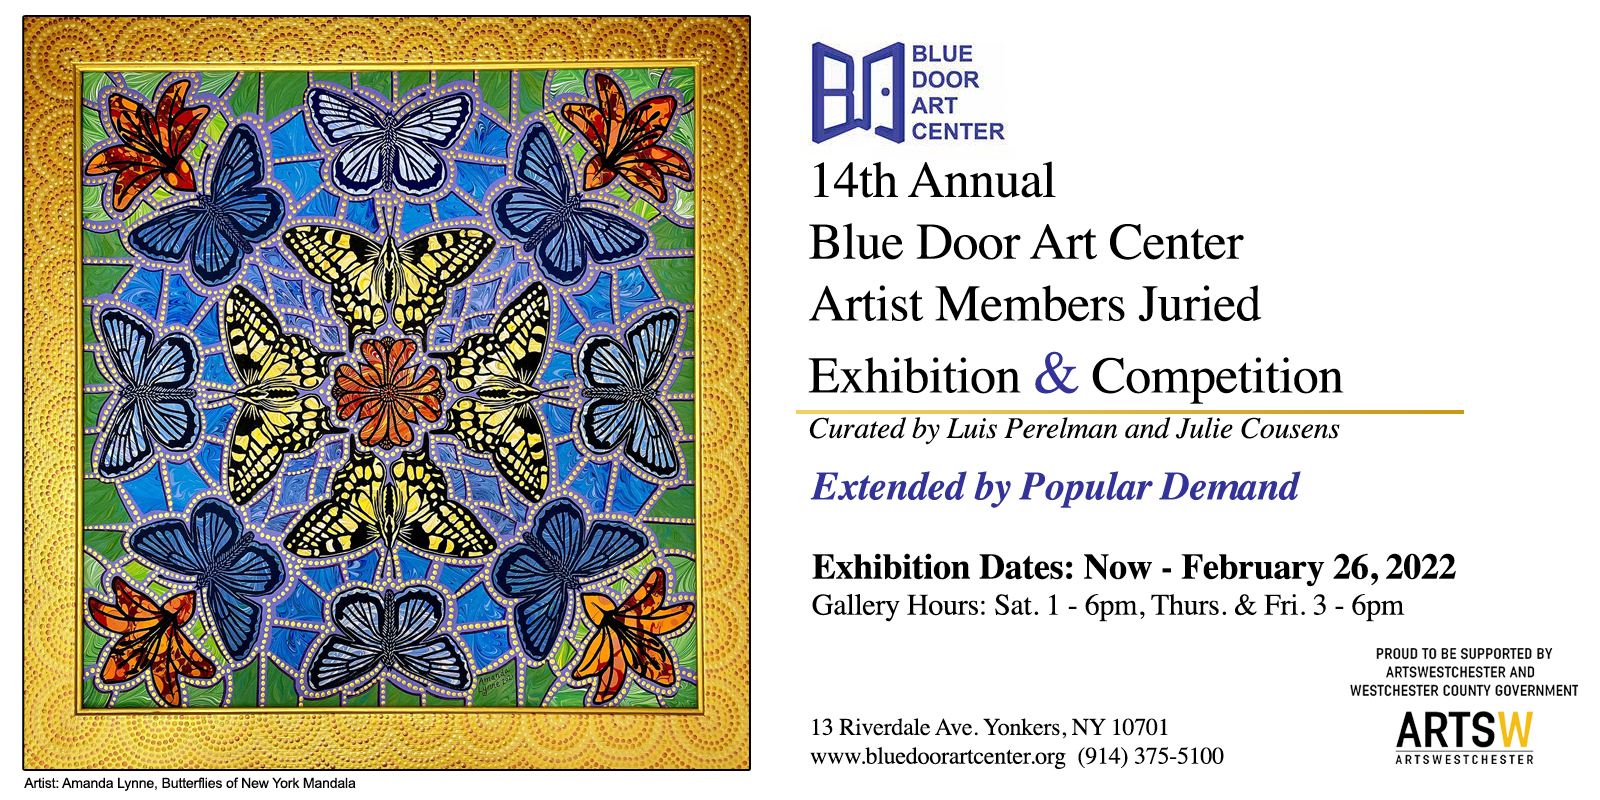 Blue Door Artist Members Juried Exhibition and Competition